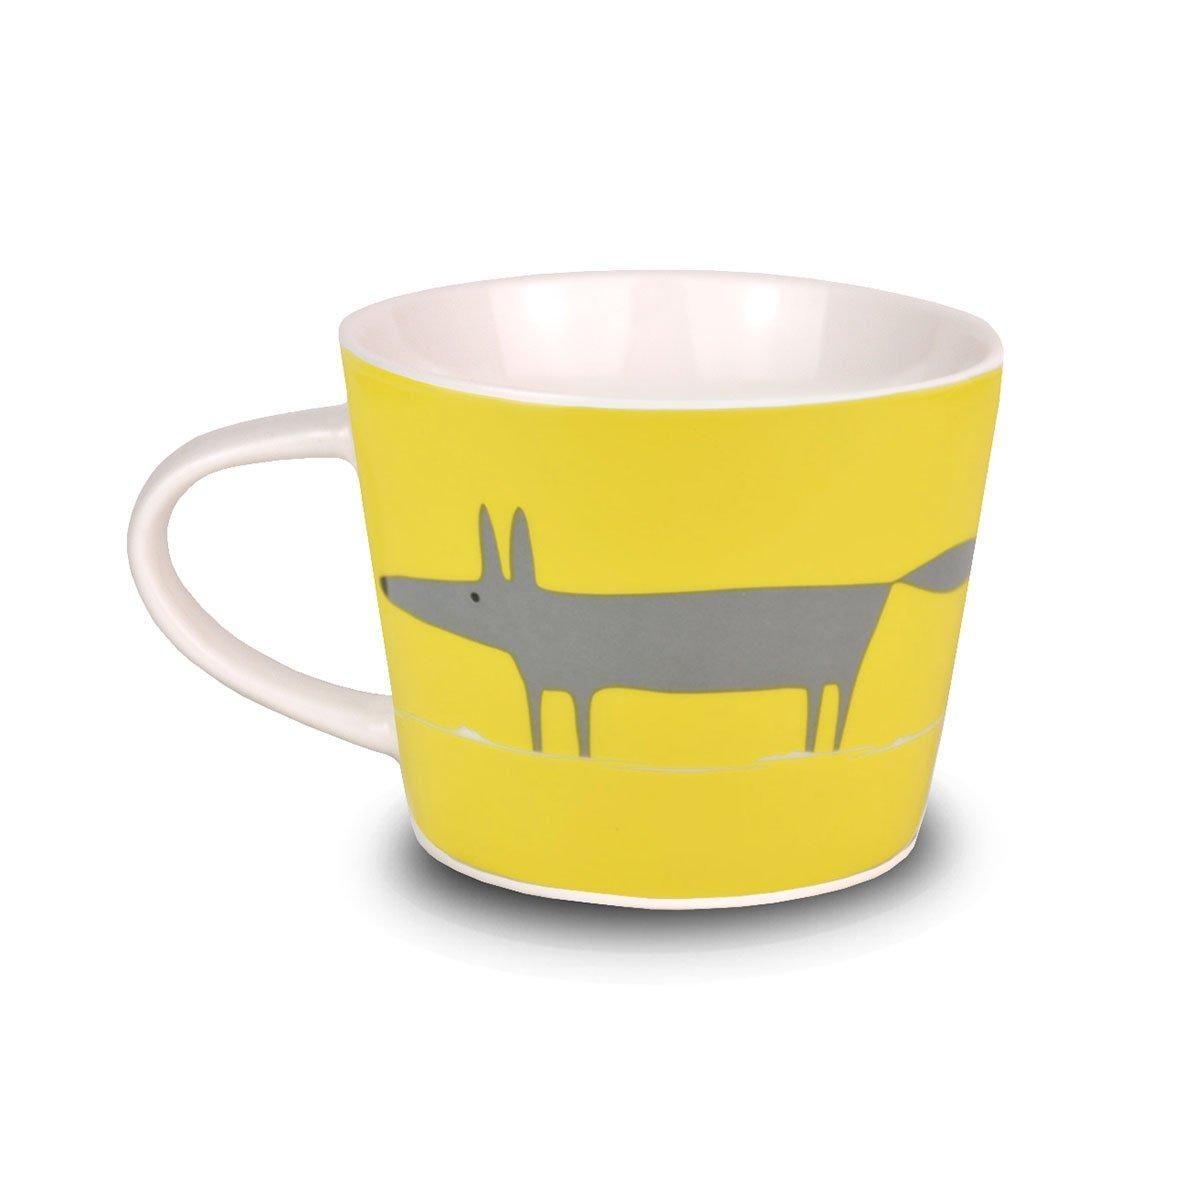  Mugs And Cups SC-0099 